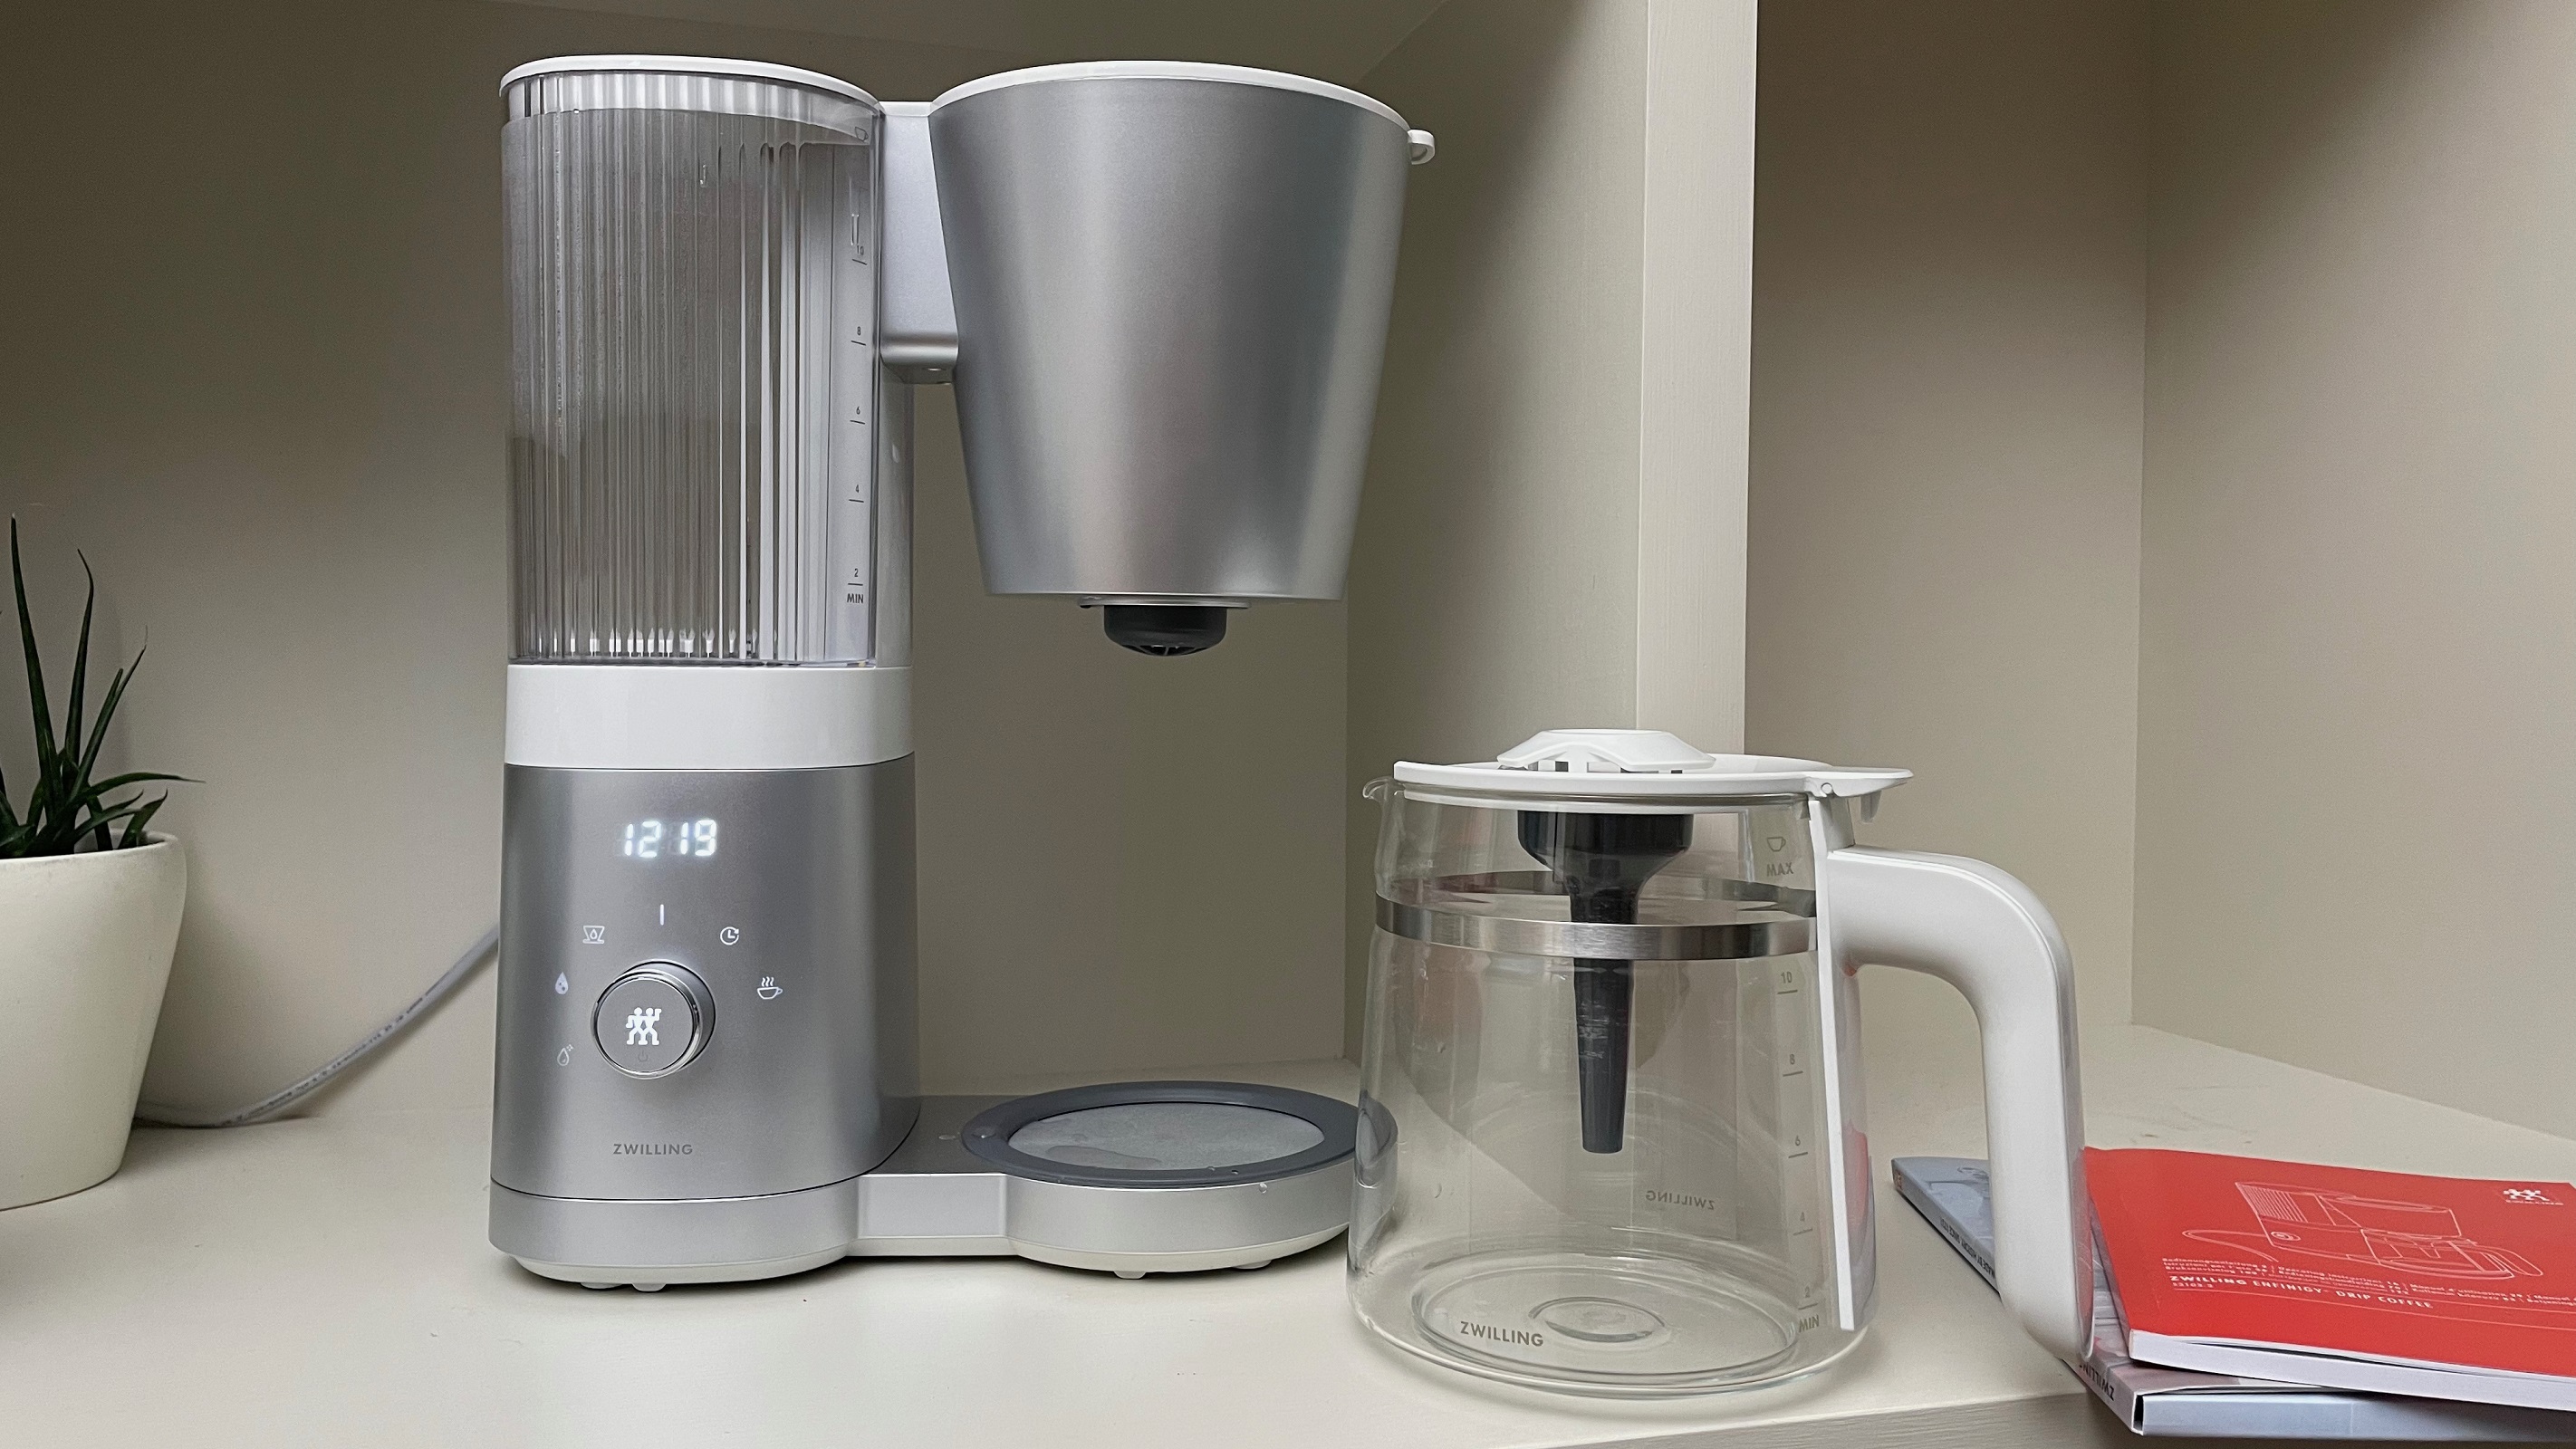 Zwilling coffee maker before first use during testing